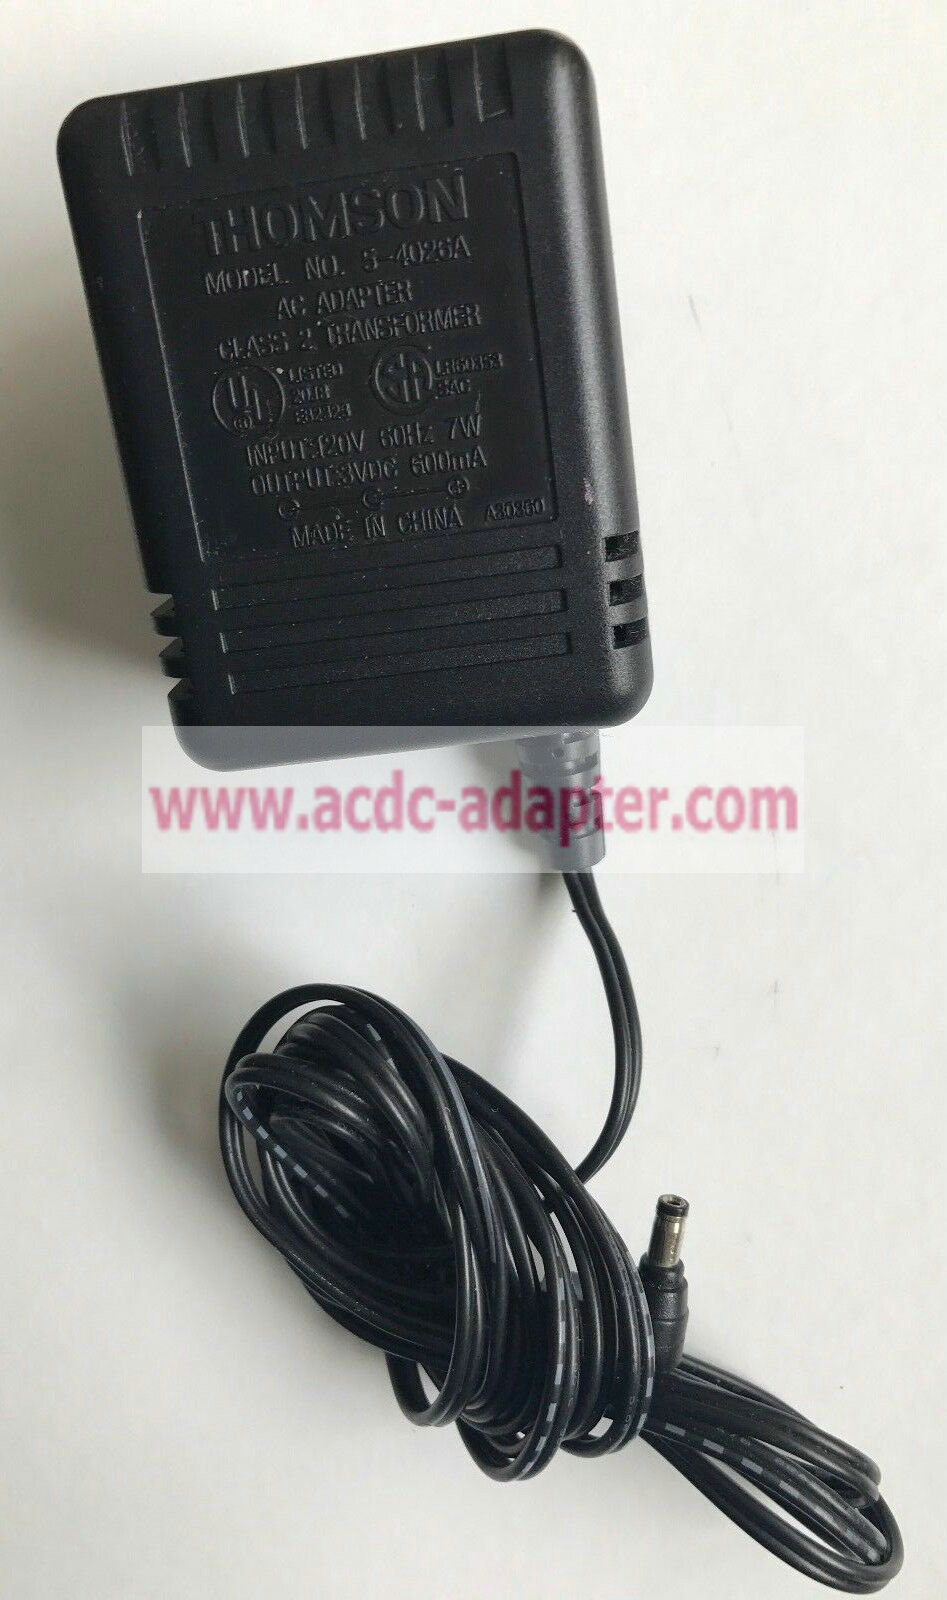 New Thomson 5-4026A 3V 600mA AC Adapter Power Supply